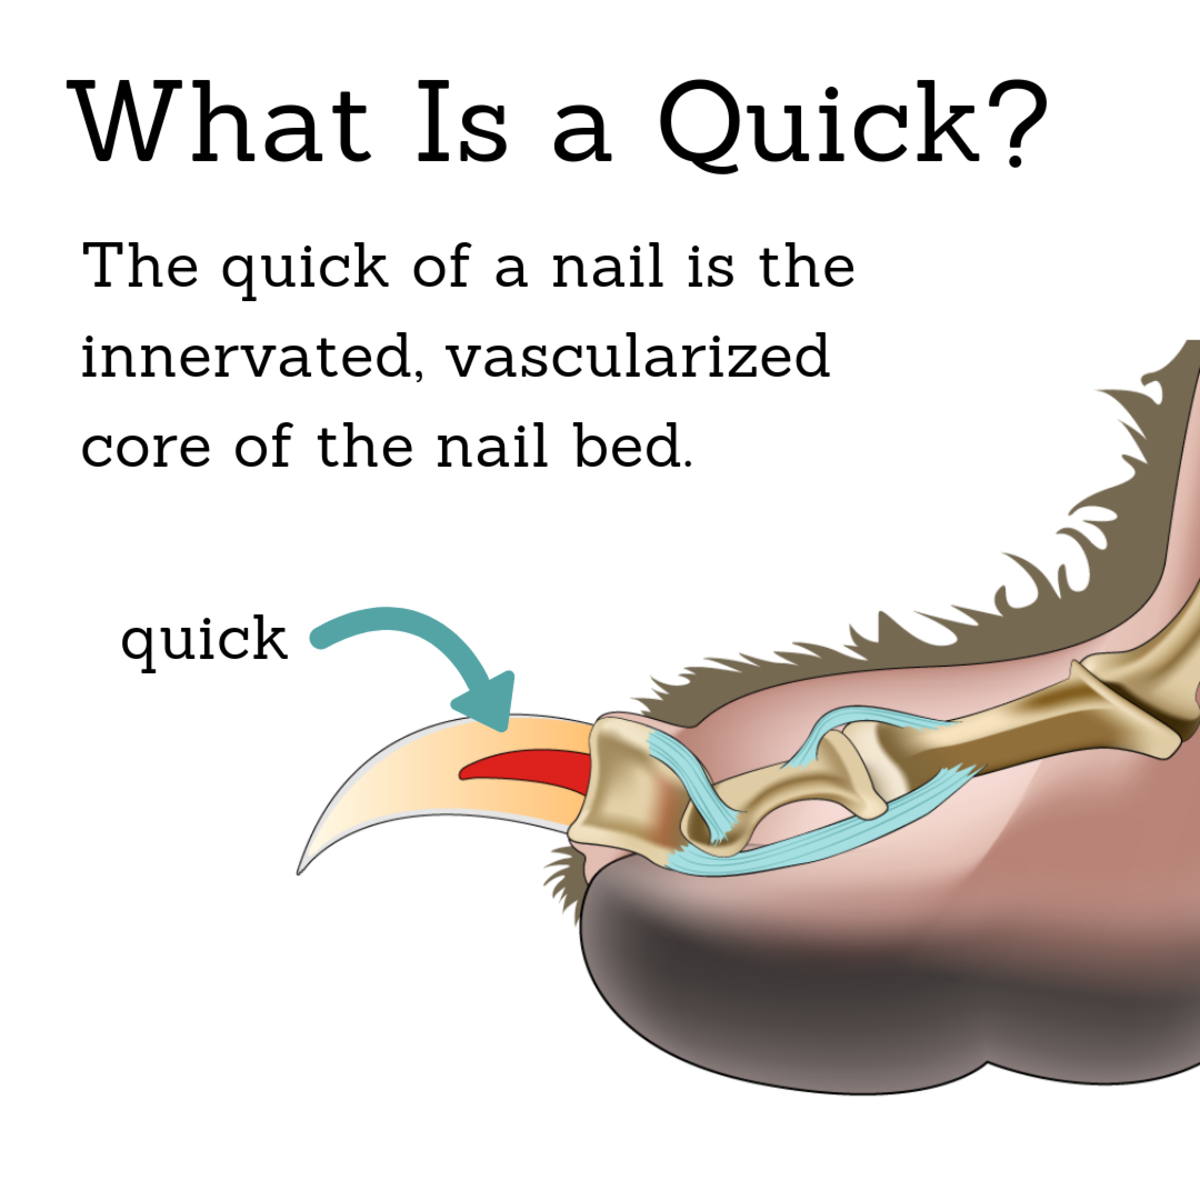 The quick of the dog nail is vascularized and innervated.